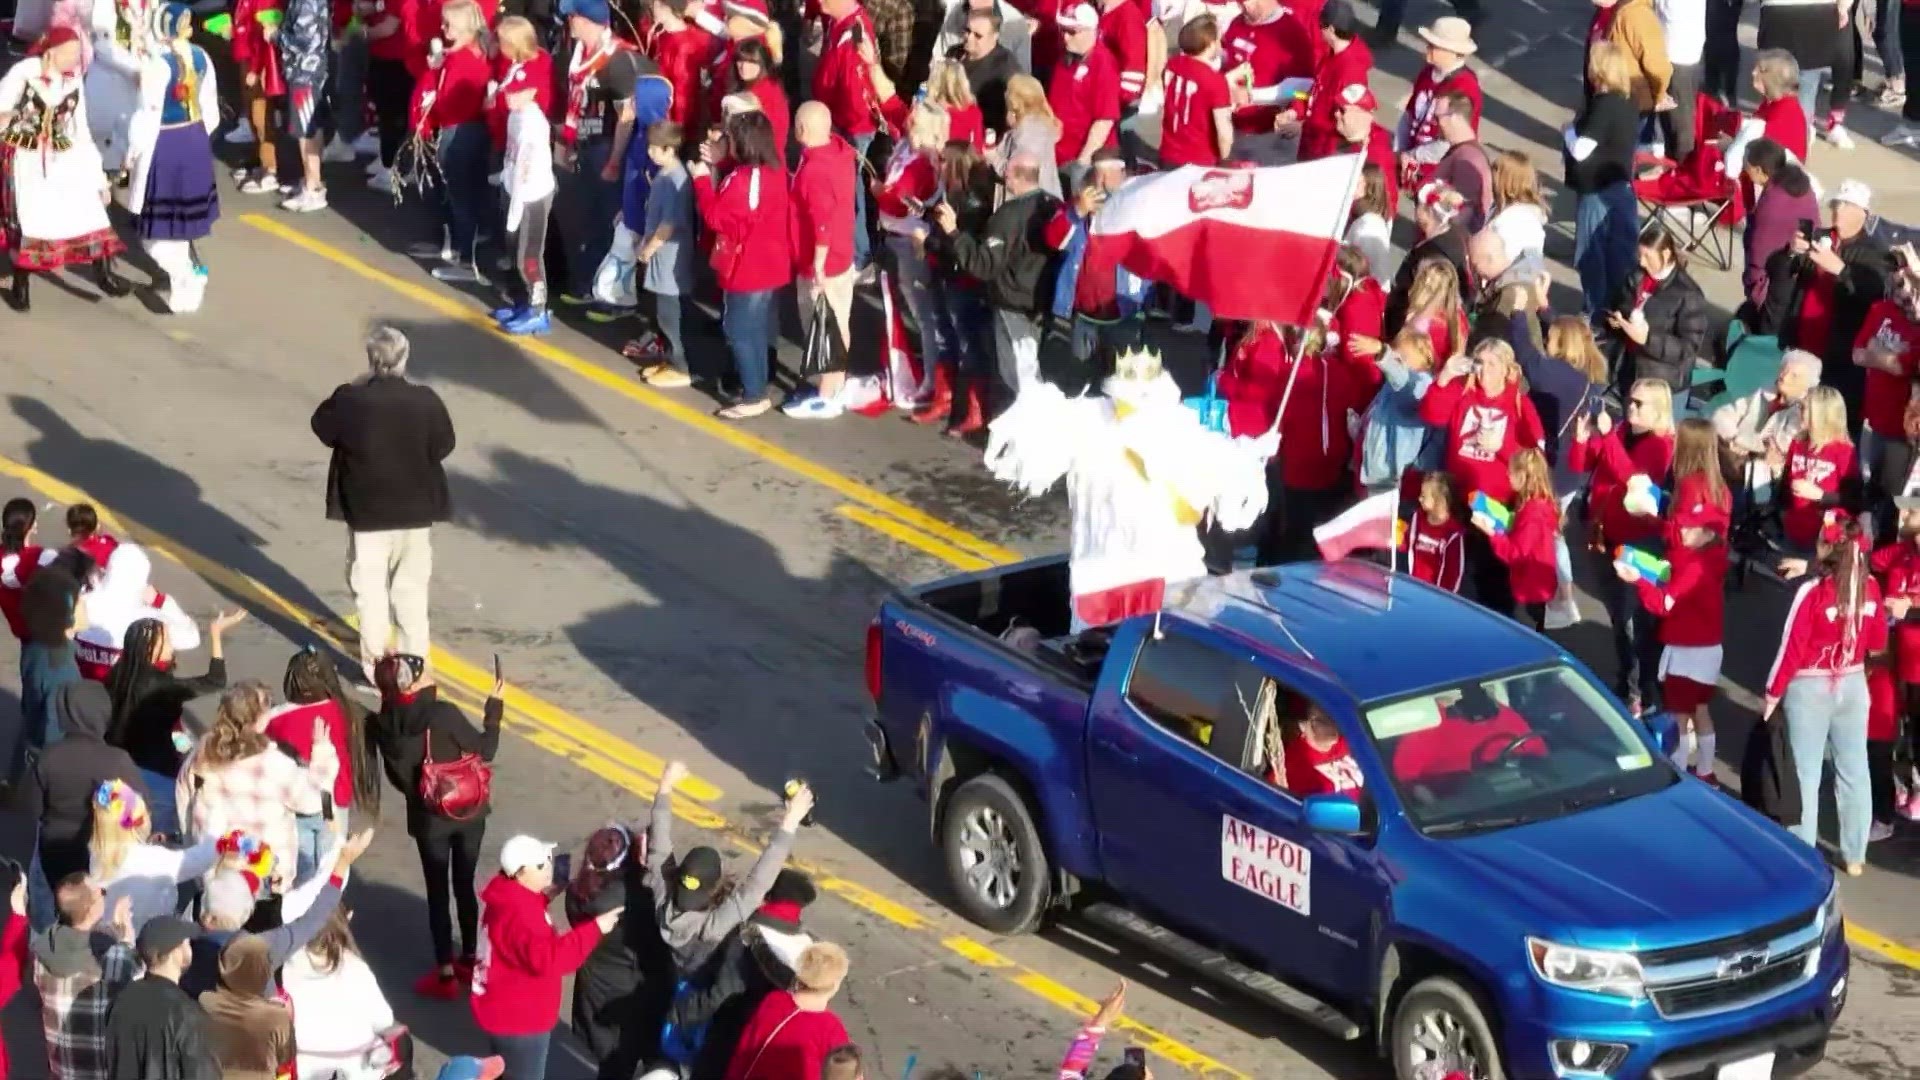 Buffalo celebrates Dyngus Day with its annual parade